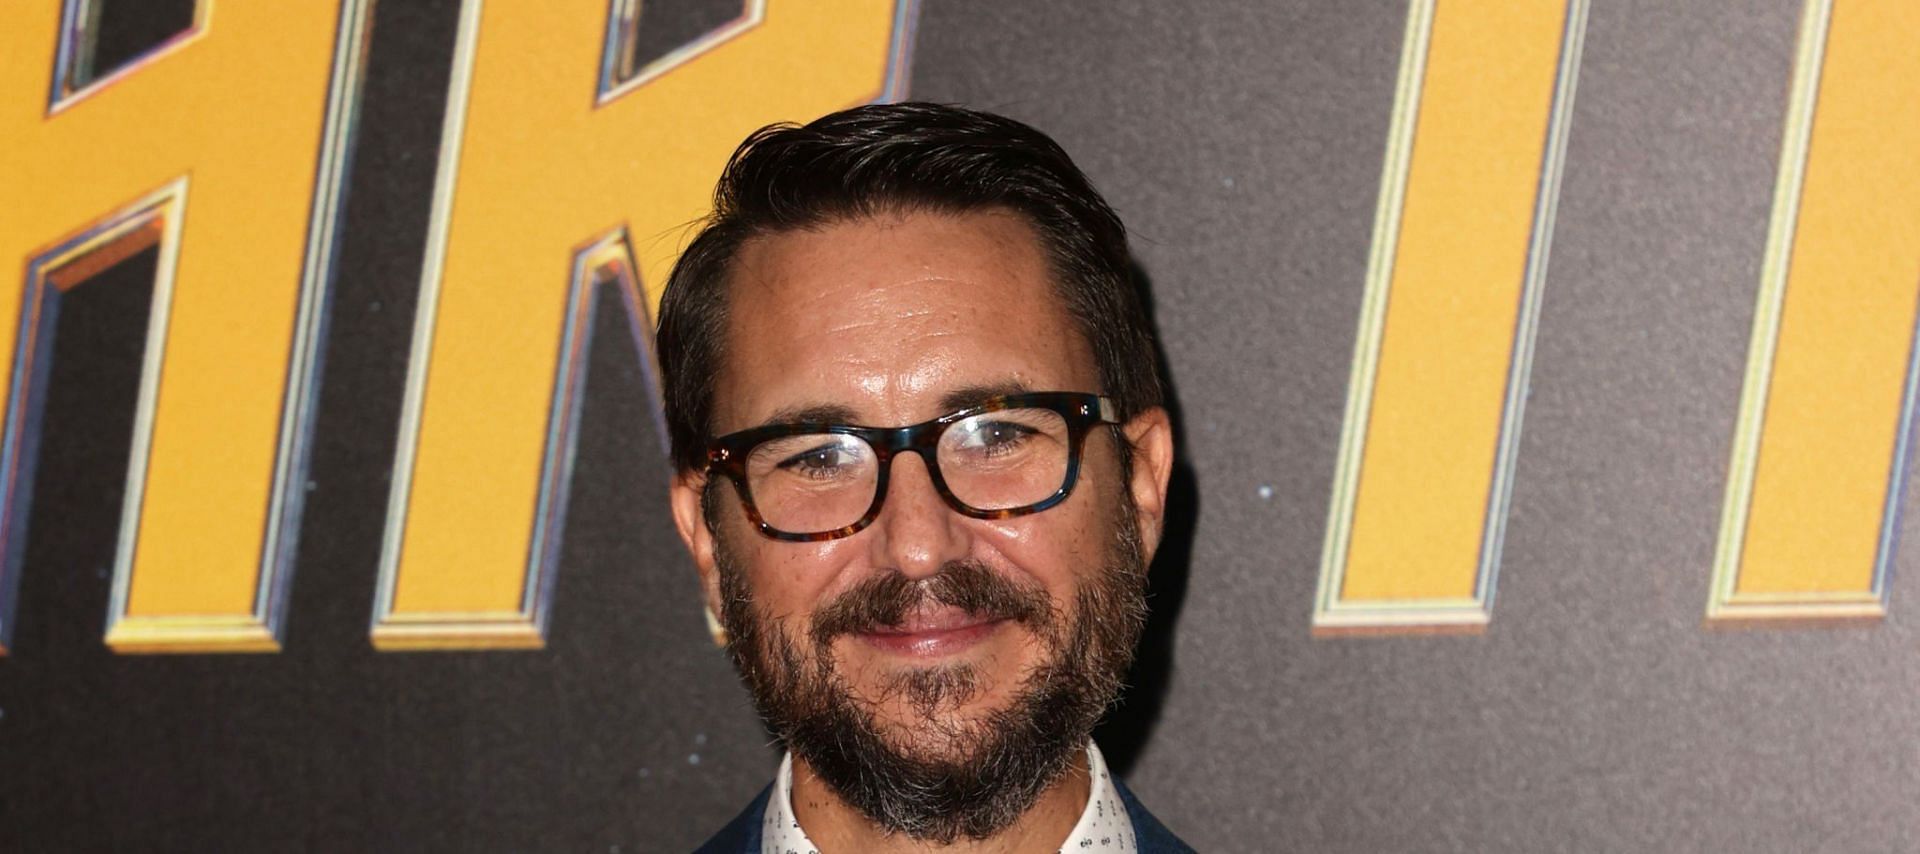 Wil Wheaton revealed his parents forced him to take up acting at a young age (Image via Kevin Winter/Getty Images)